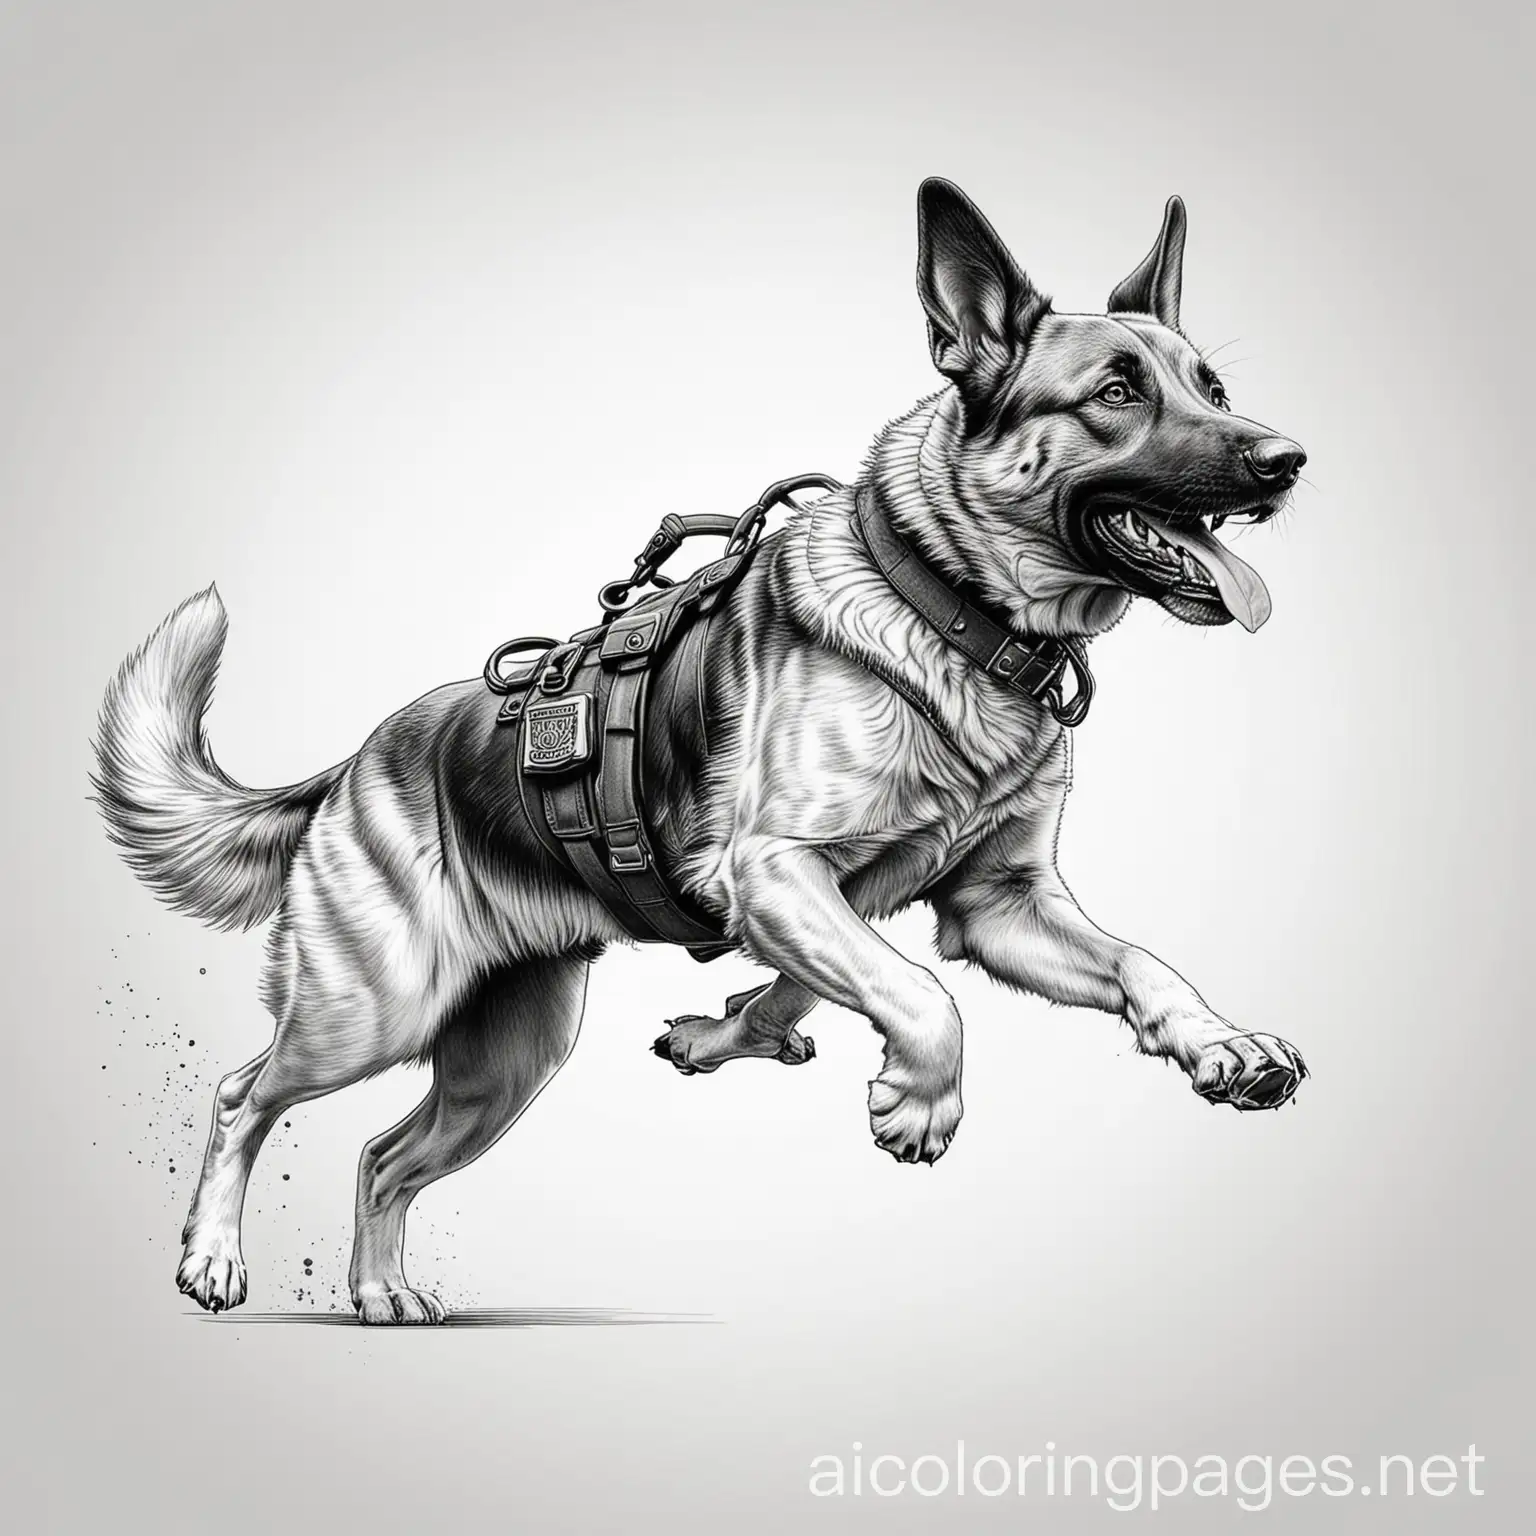 Police-Dog-Chasing-Coloring-Page-with-Ample-White-Space